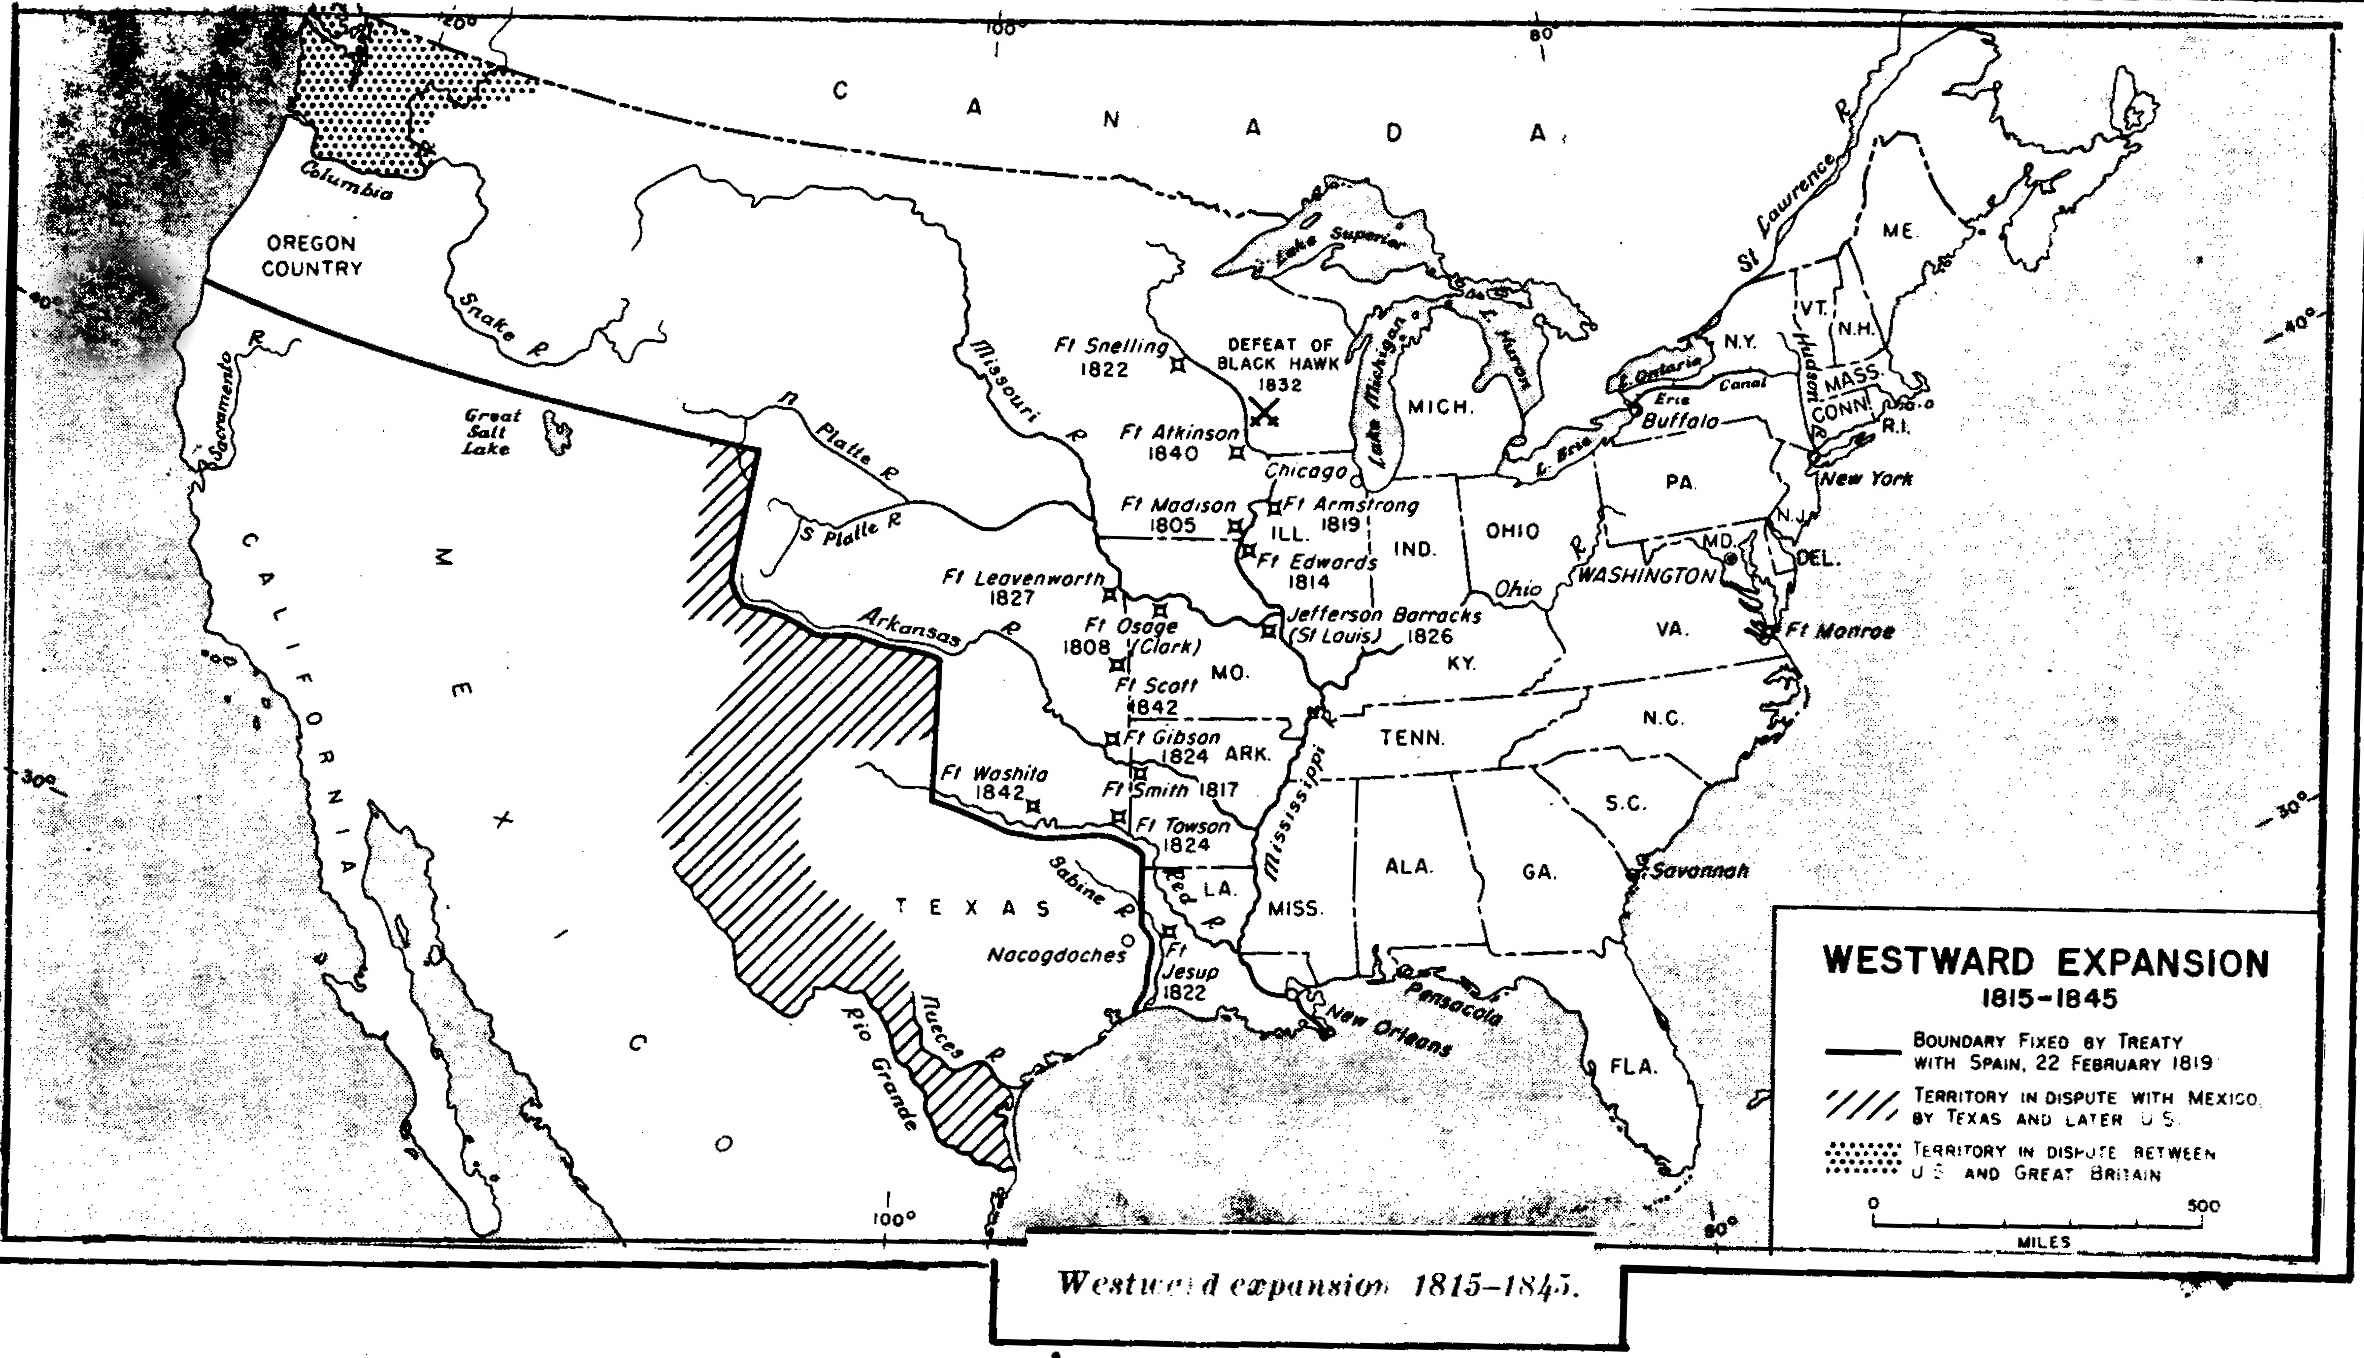 a map of the United States showing expansion westward